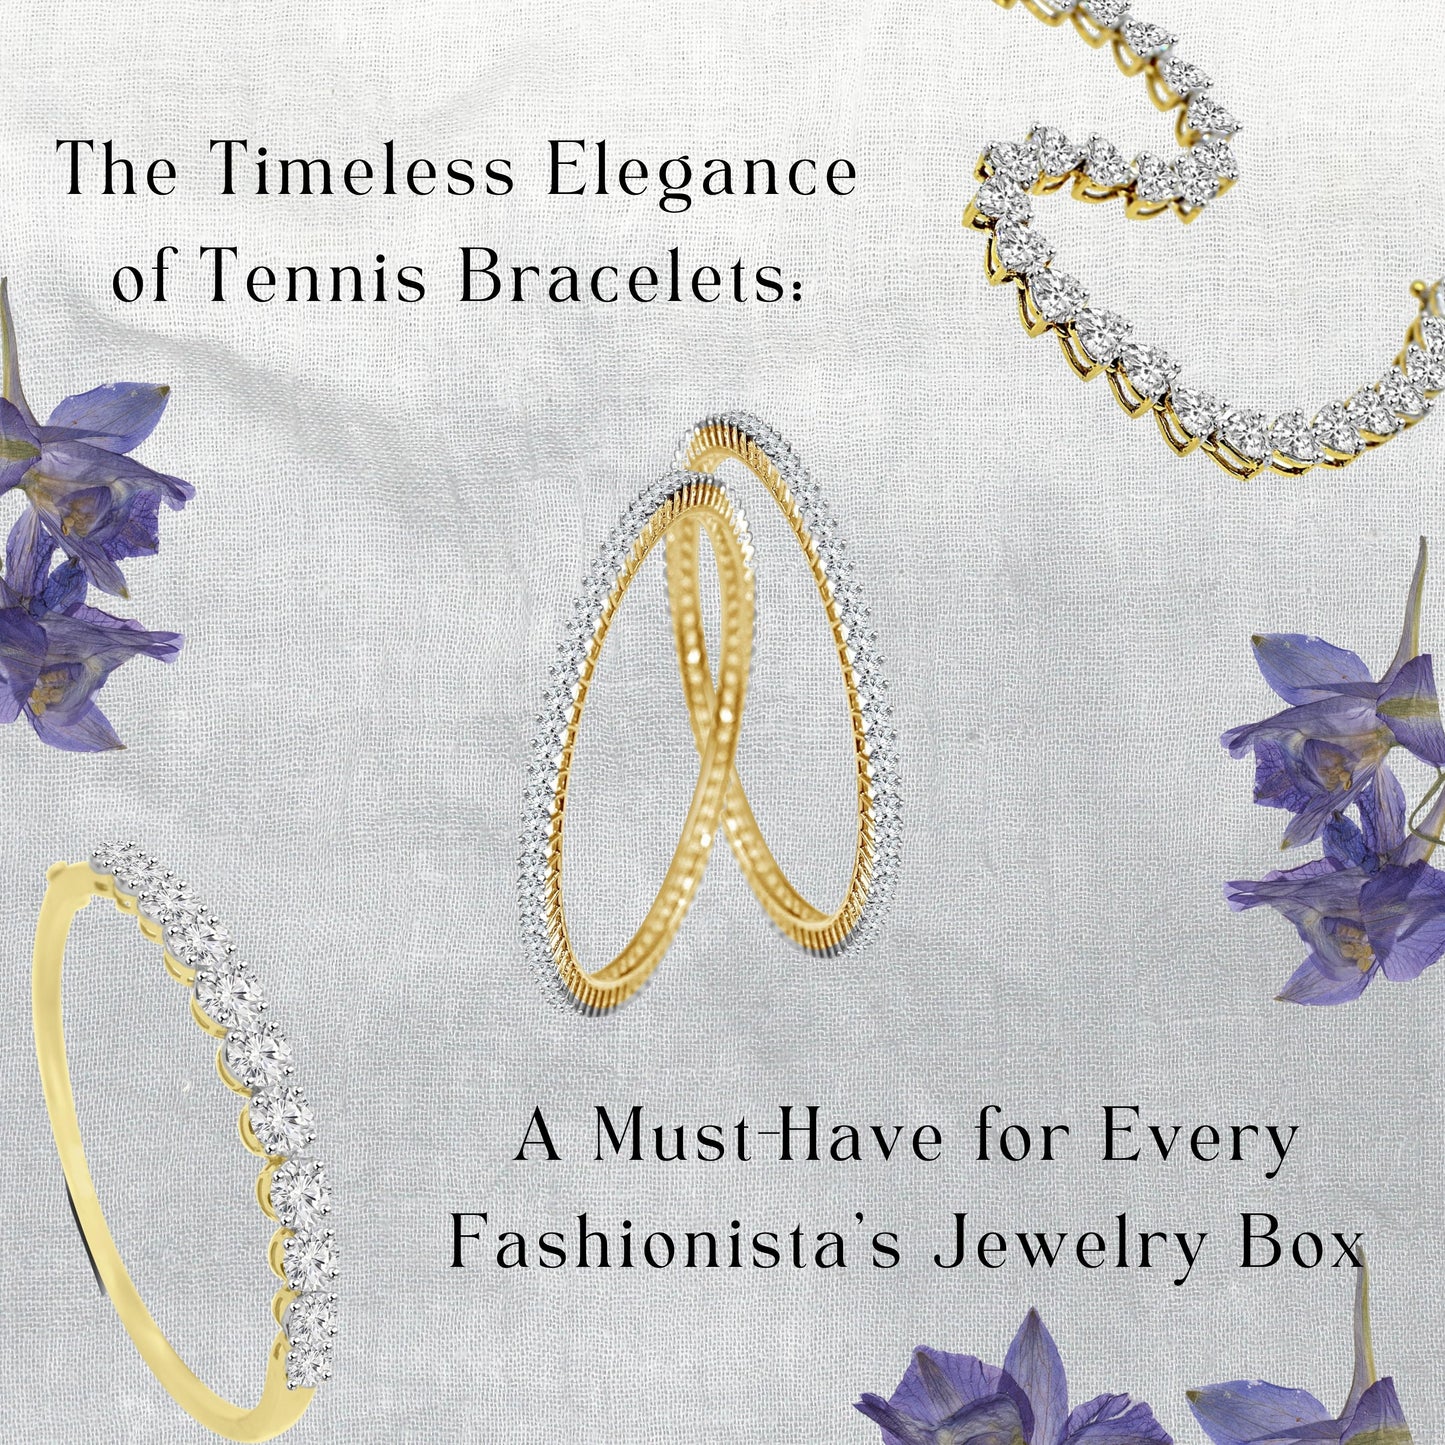 The Timeless Elegance of Tennis Bracelets: A Must-Have for Every Fashionista's Jewelry Box